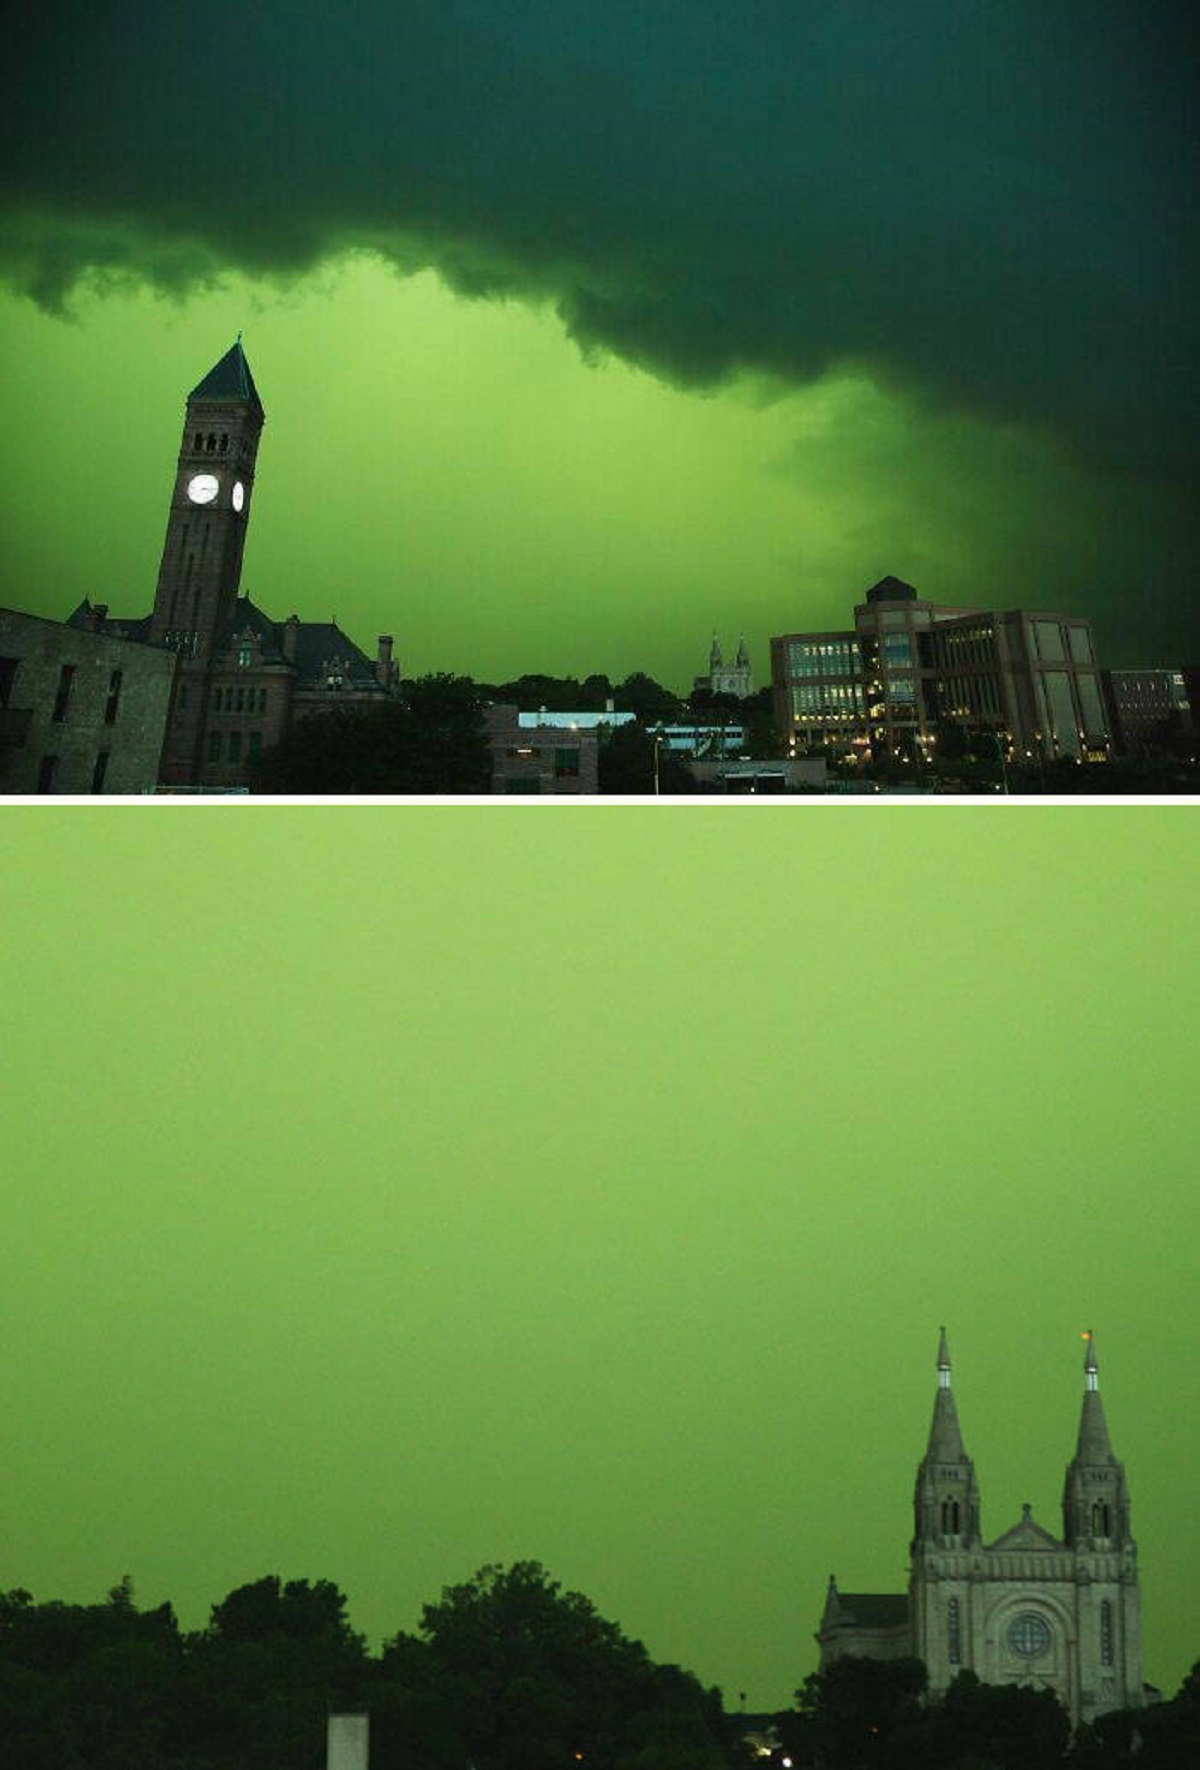 "Sioux Falls, SD Turned Green (No Filter) During A Huge Storm Tonight"